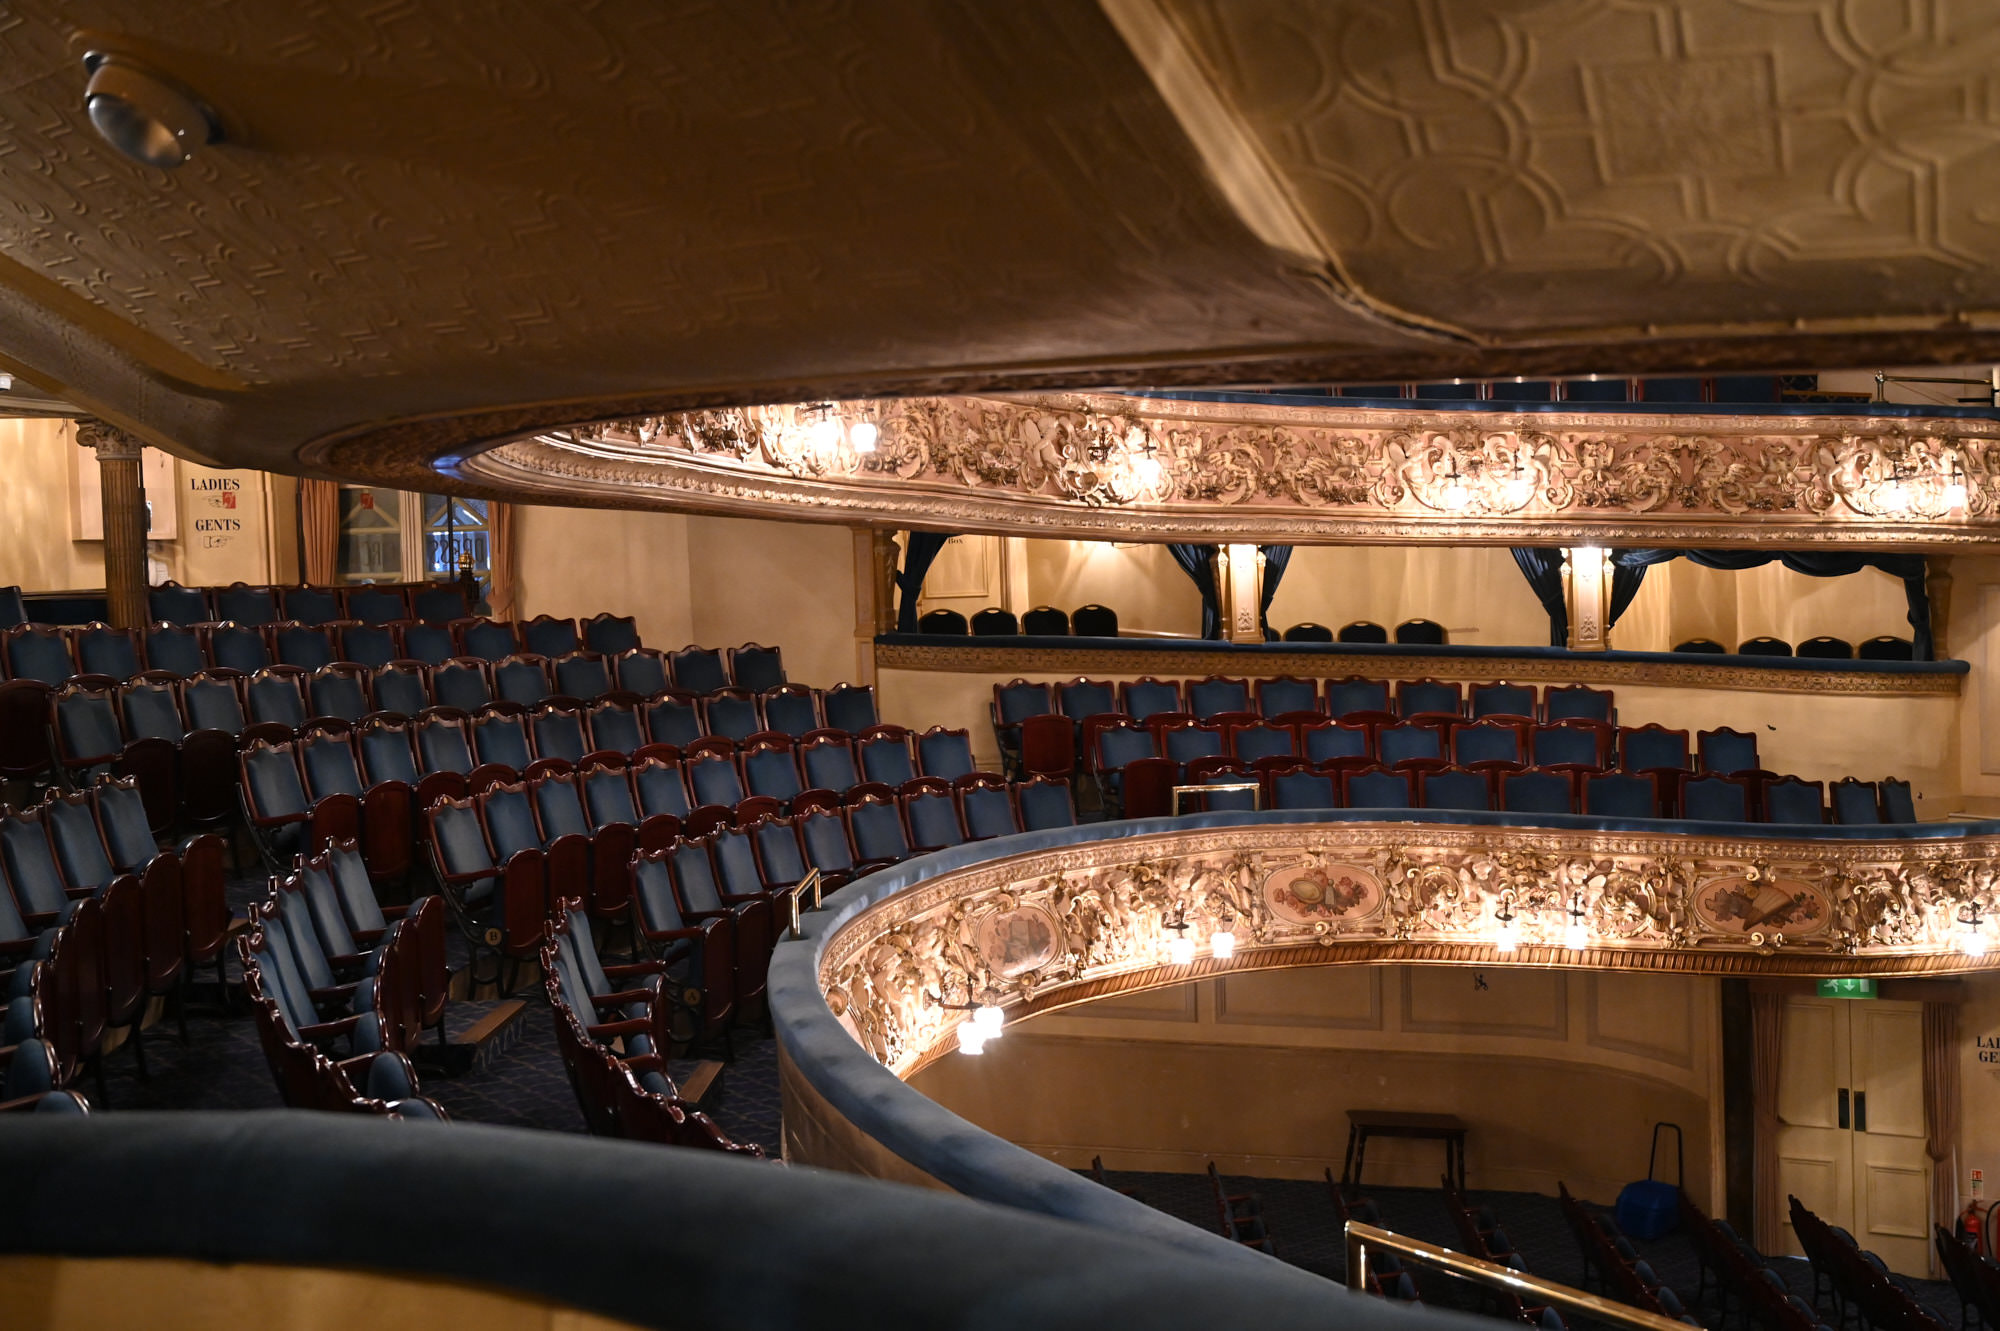 Seating at Blackpool Grand Theatre